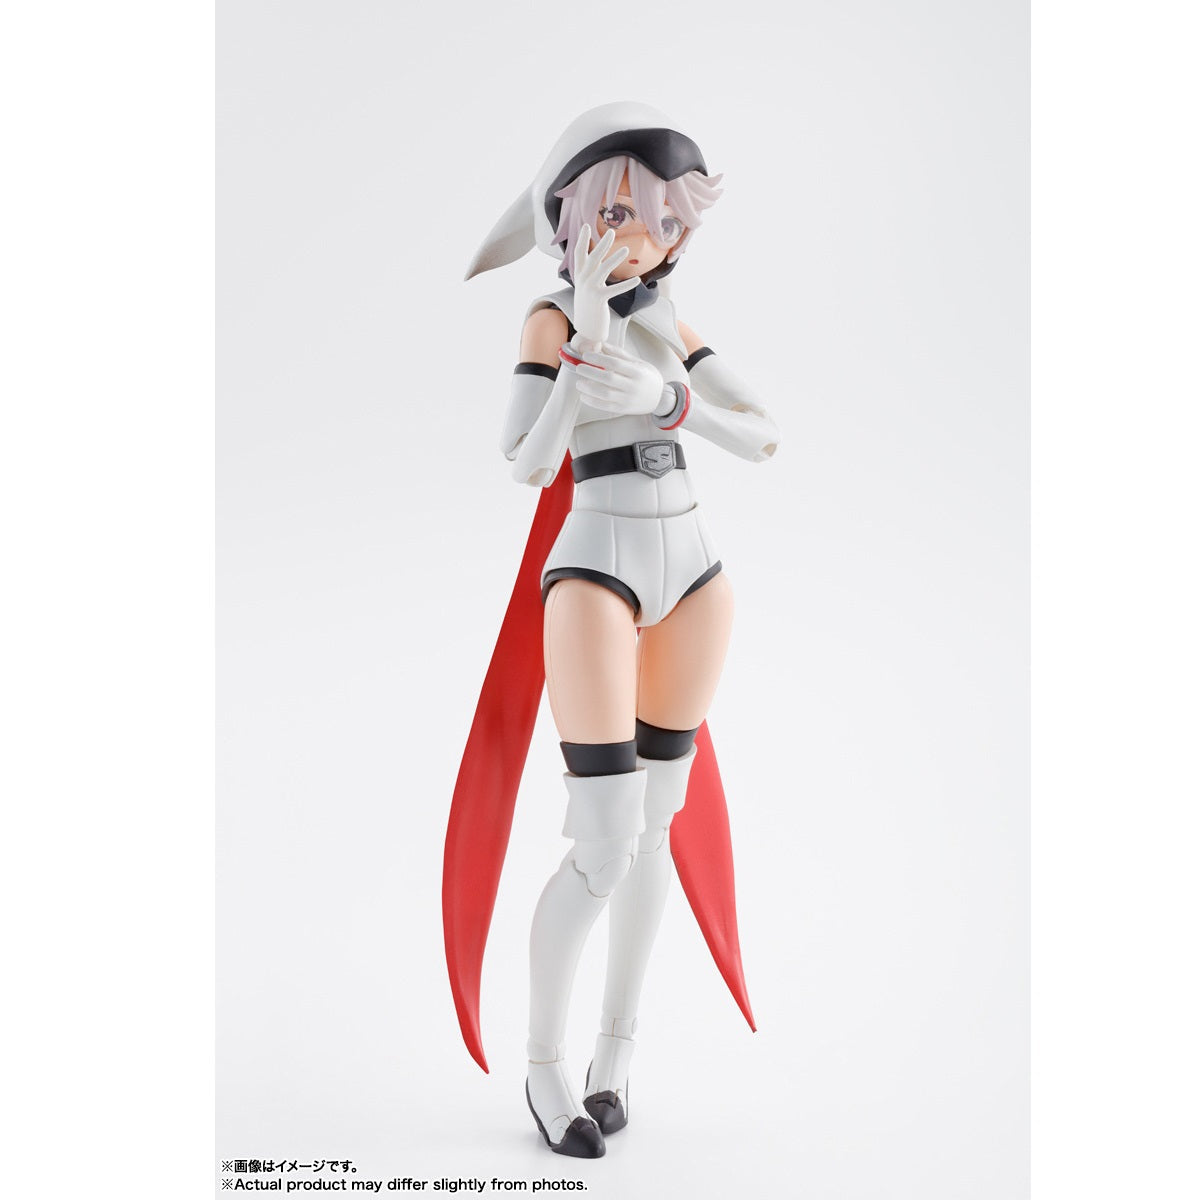 S.H.Figuarts " SHY"-Tamashii-Ace Cards & Collectibles